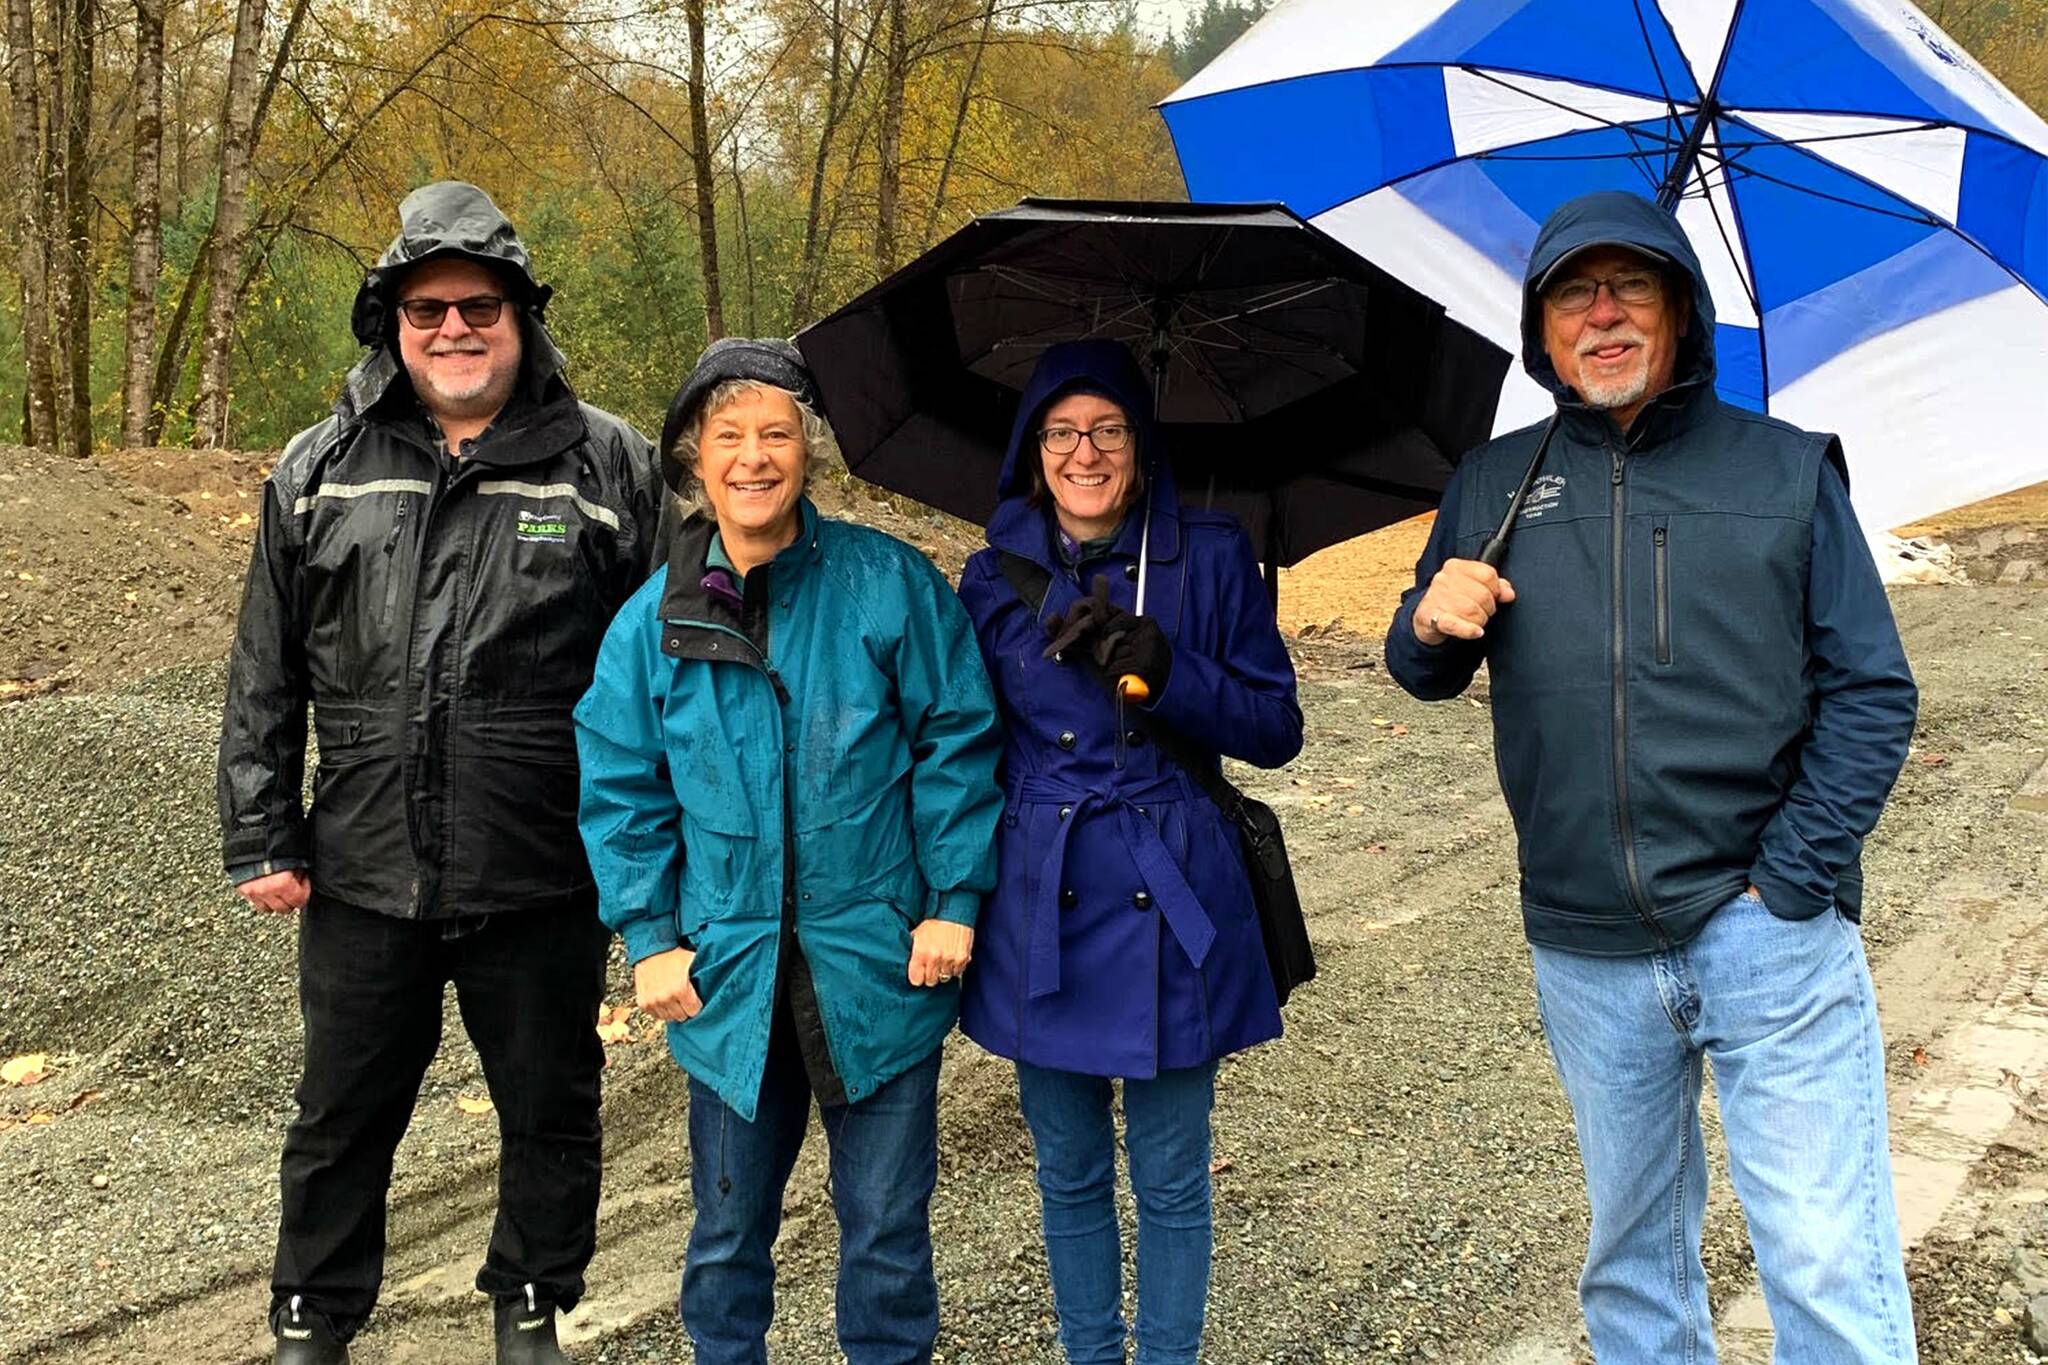 King County Parks Program Manager TJ Davis tours Preston Mill Park with members of the Fall City Historical Society. From left: Davis, Cindy Parks, Sarah Martin and Rick Divers. Photo courtesy of Kathy Lambert